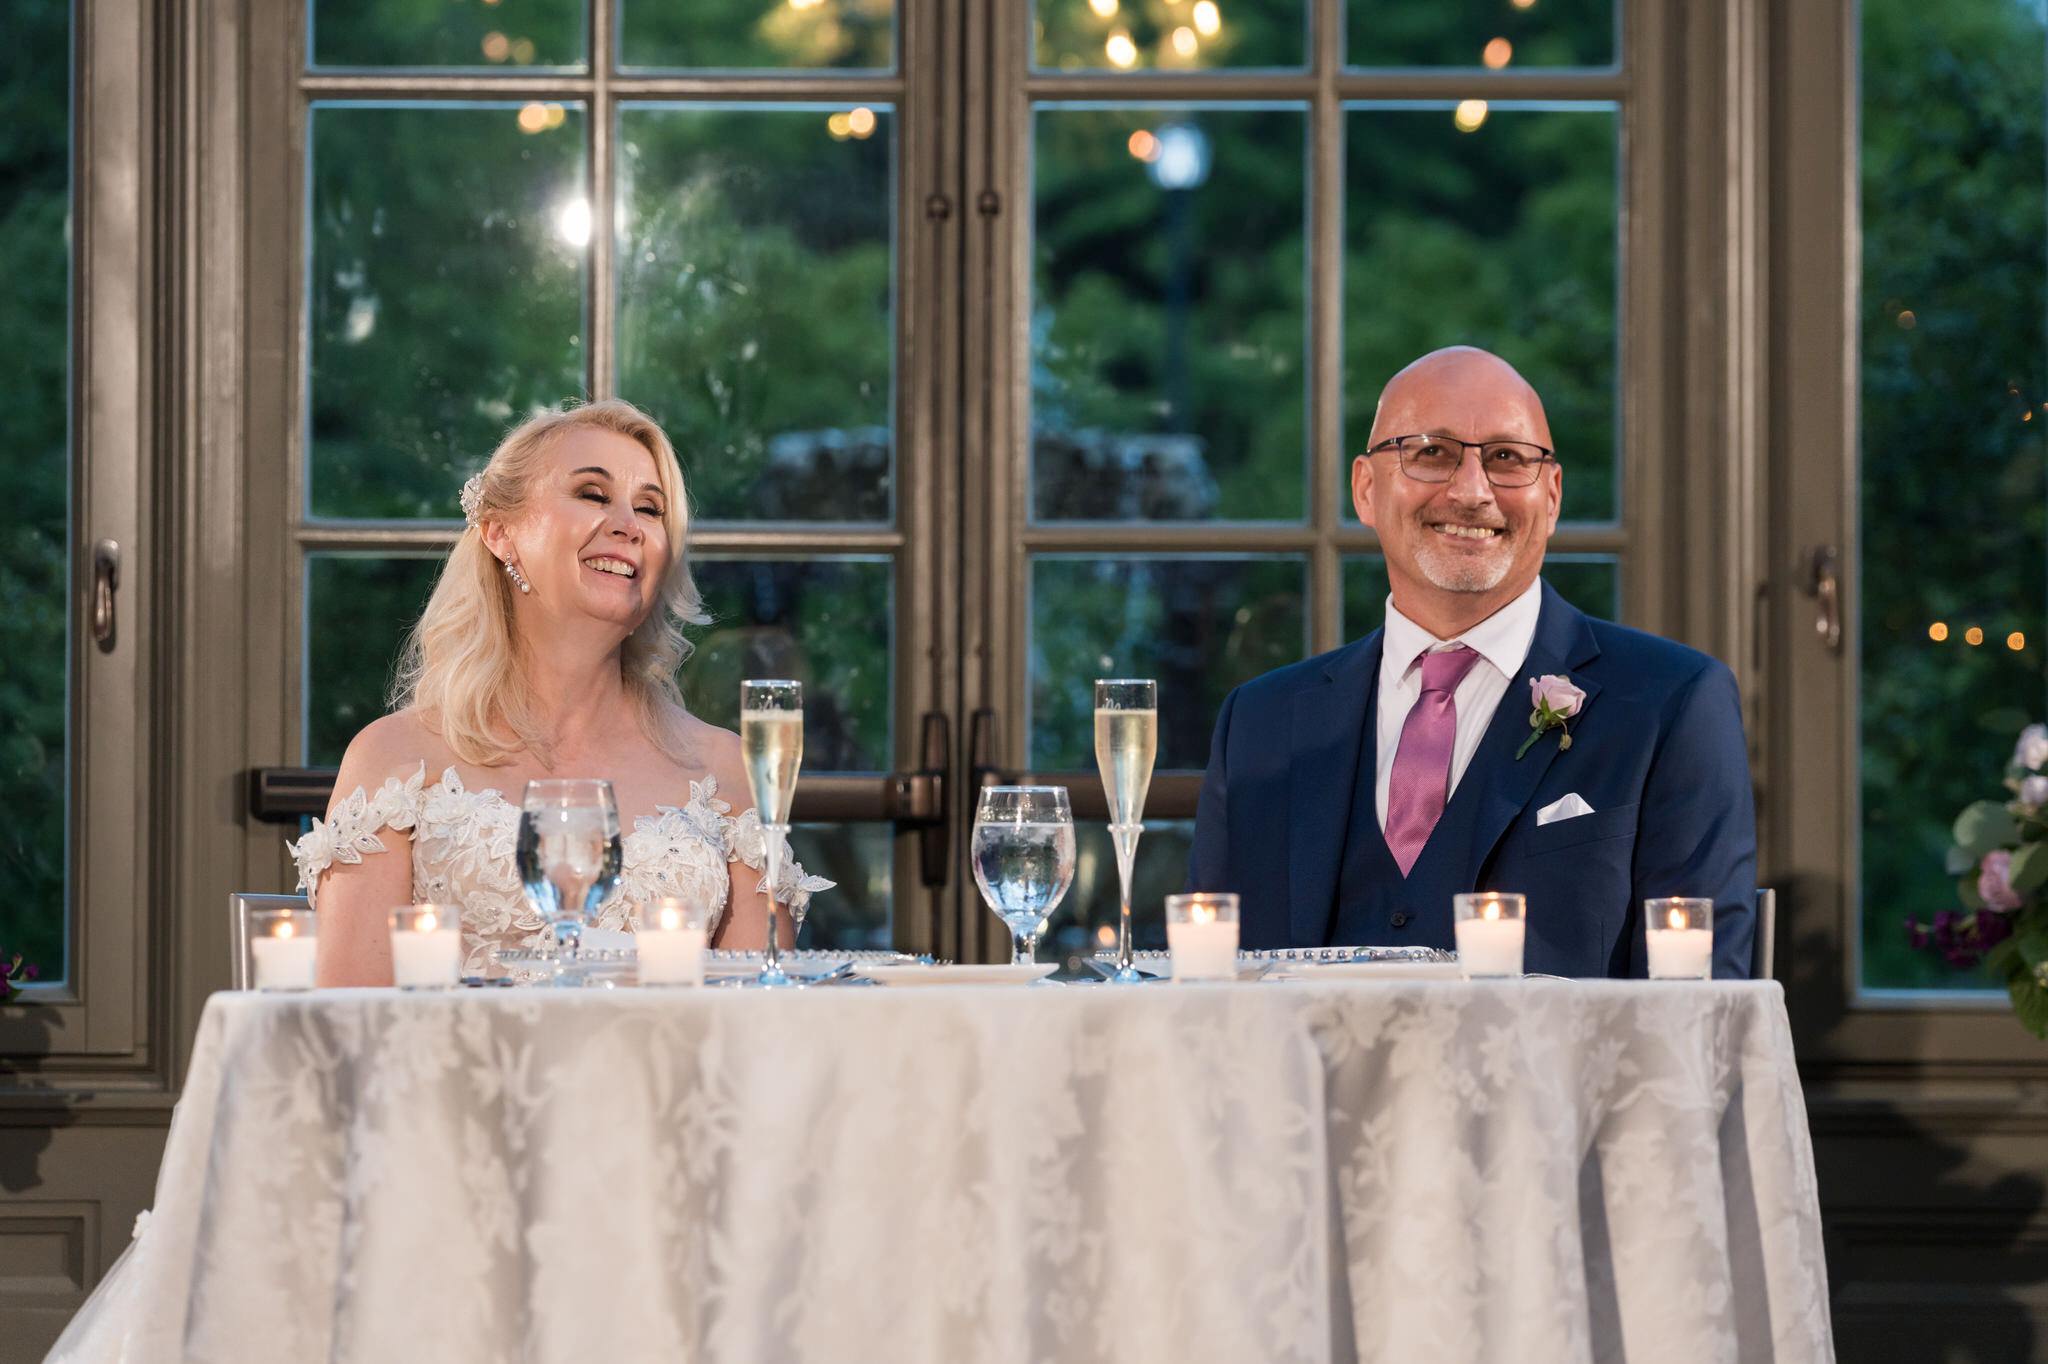 A bride and groom, sitting at a sweetheart table, laugh during their Royal Park wedding reception.  